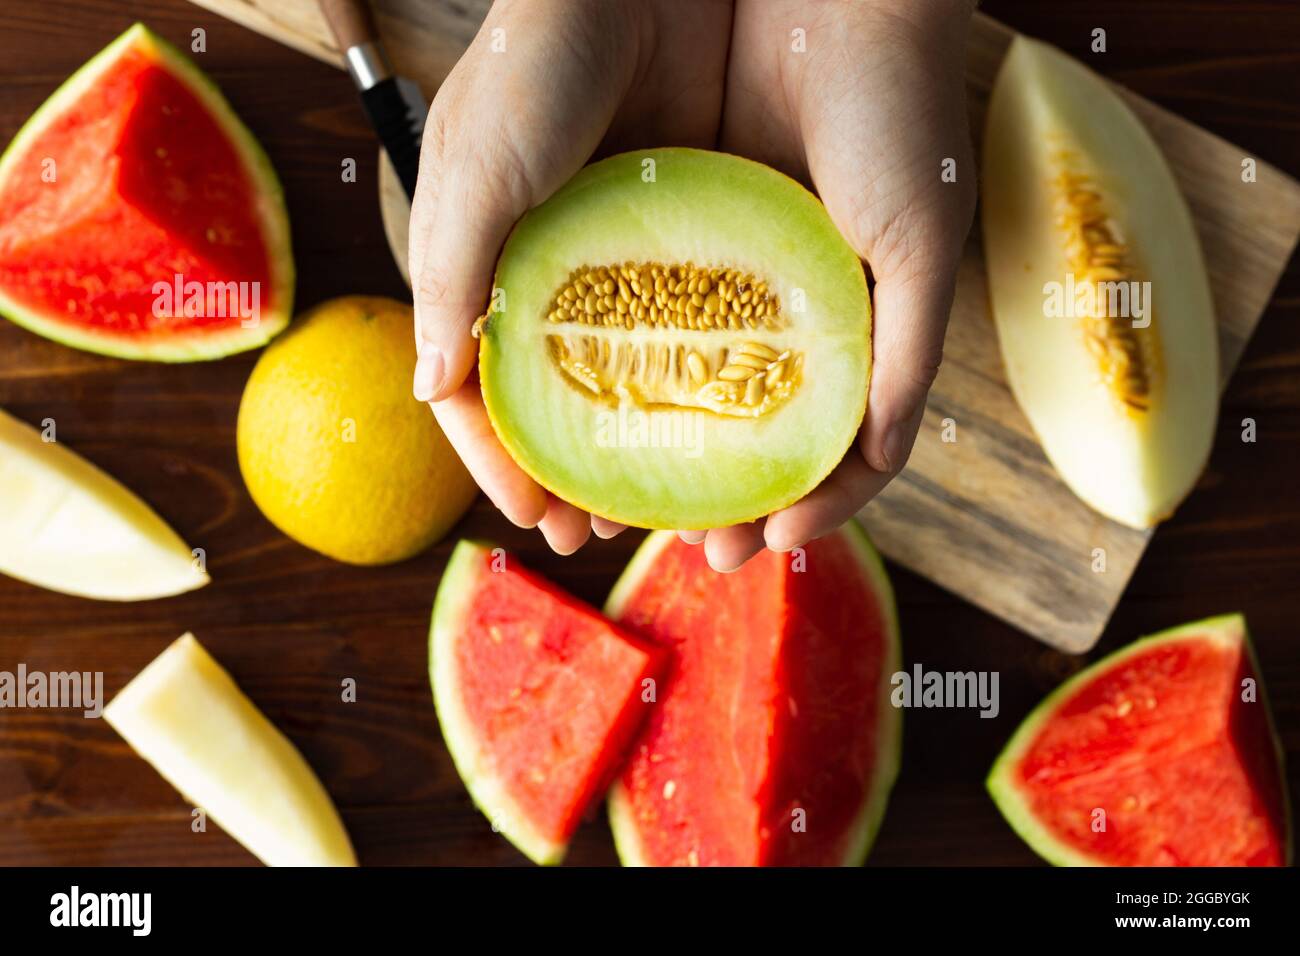 Top view of hands holding half a galia melon with seeds; variety of melons; summer fruits Stock Photo